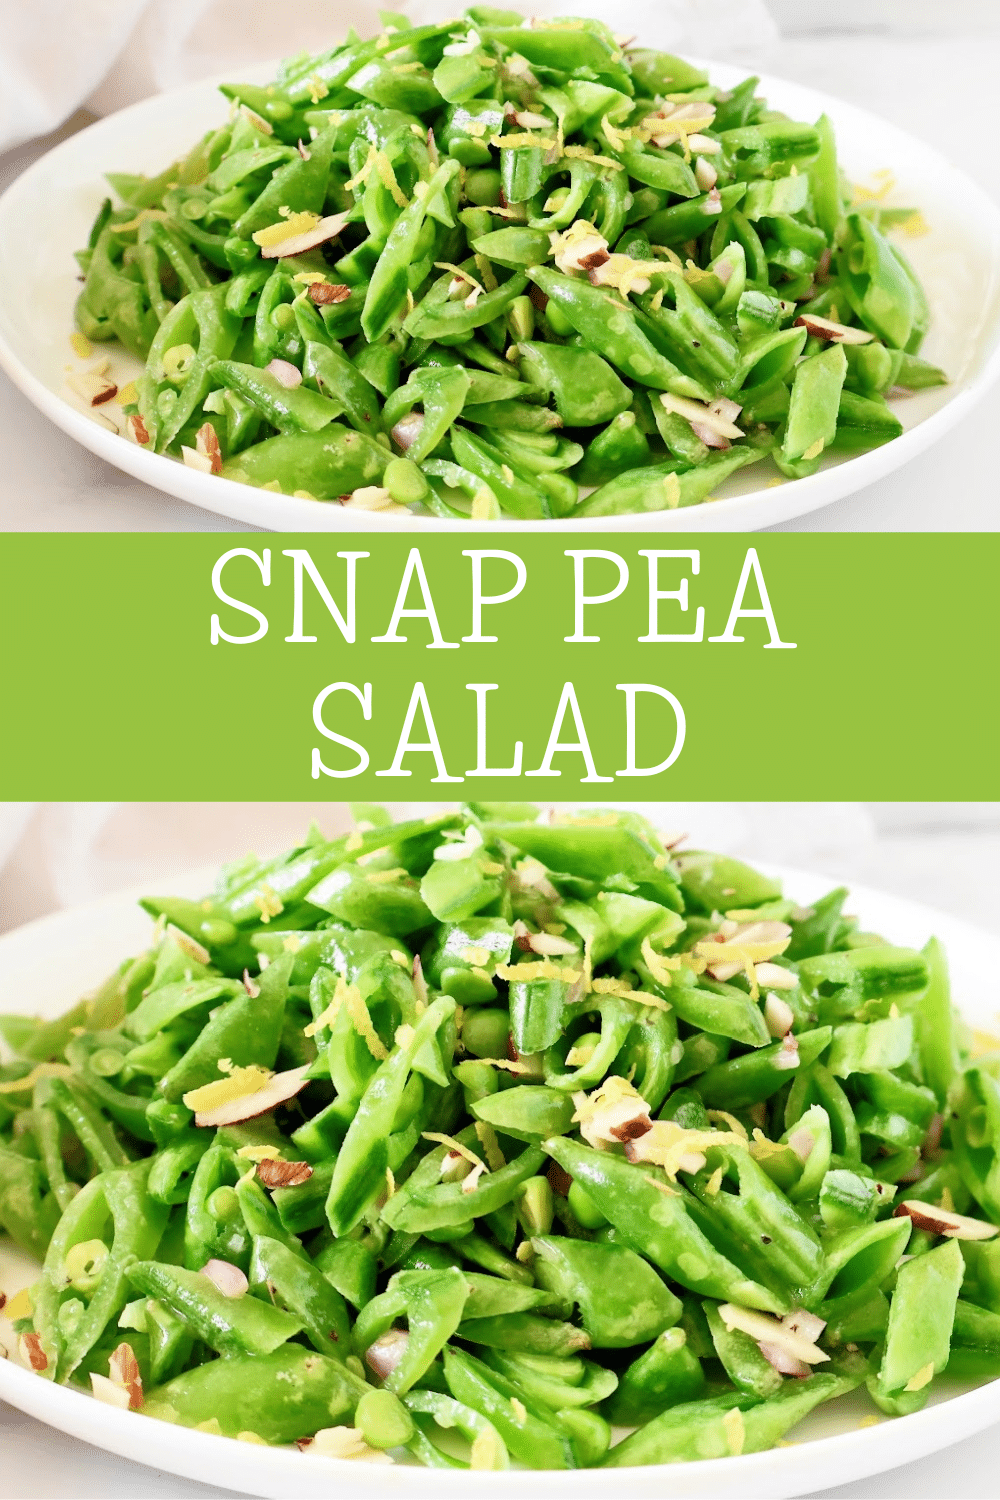 Fresh and flavorful Snap Pea Salad recipe! Crisp sugar snap peas tossed with toasted almonds and a zesty lemon dressing. Perfect for a light lunch or side dish. Vegetarian and vegan-friendly. #SnapPeaSalad #VegetarianRecipes #HealthyEating via @thiswifecooks